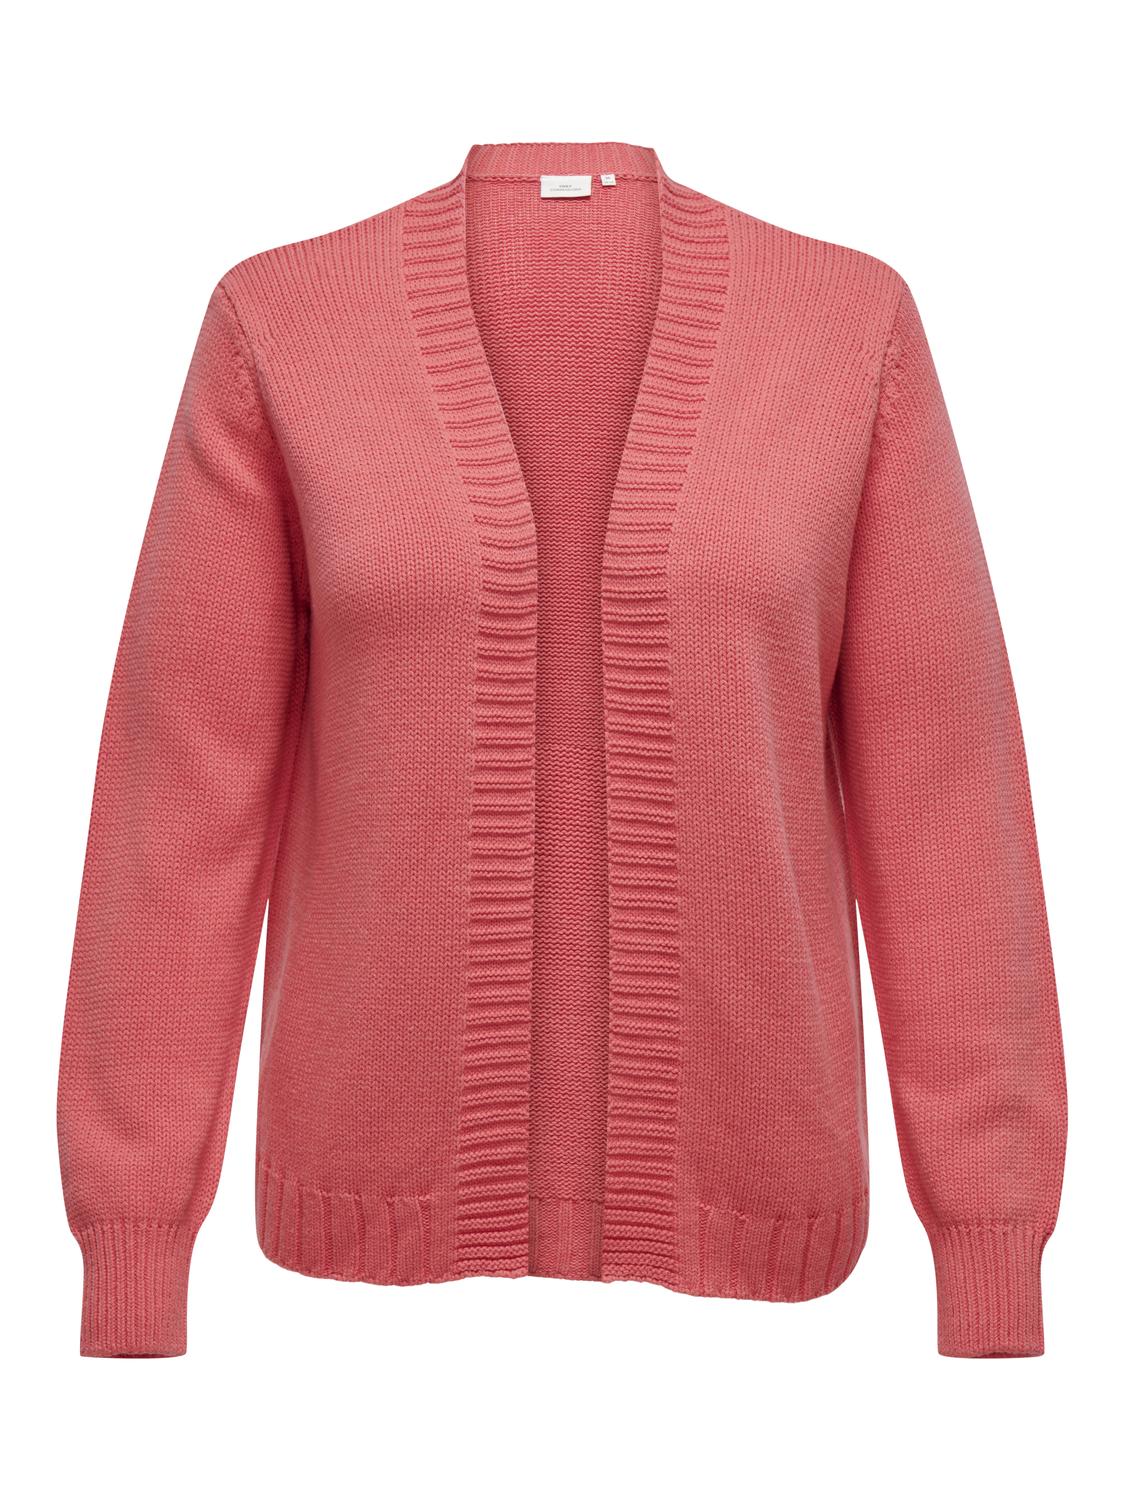 Only Carmakoma Millie Cardigan in Coral